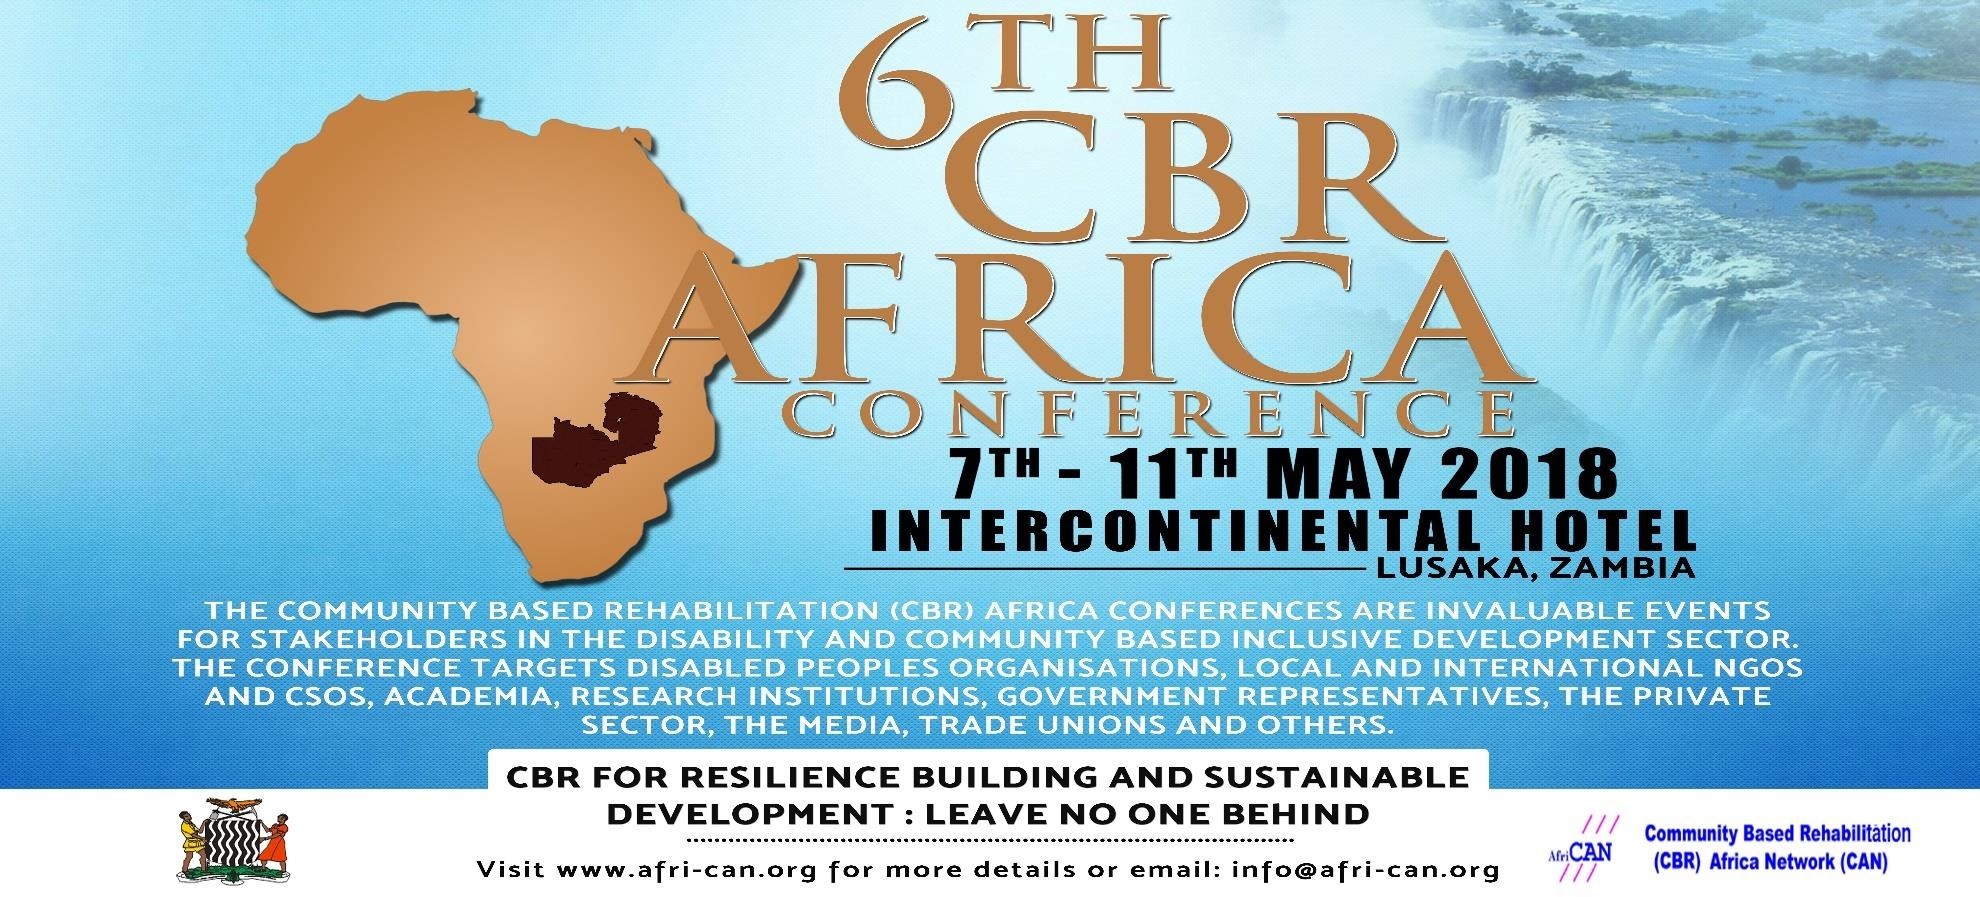 The Sixth CBR Africa Conference: Zambia 2018